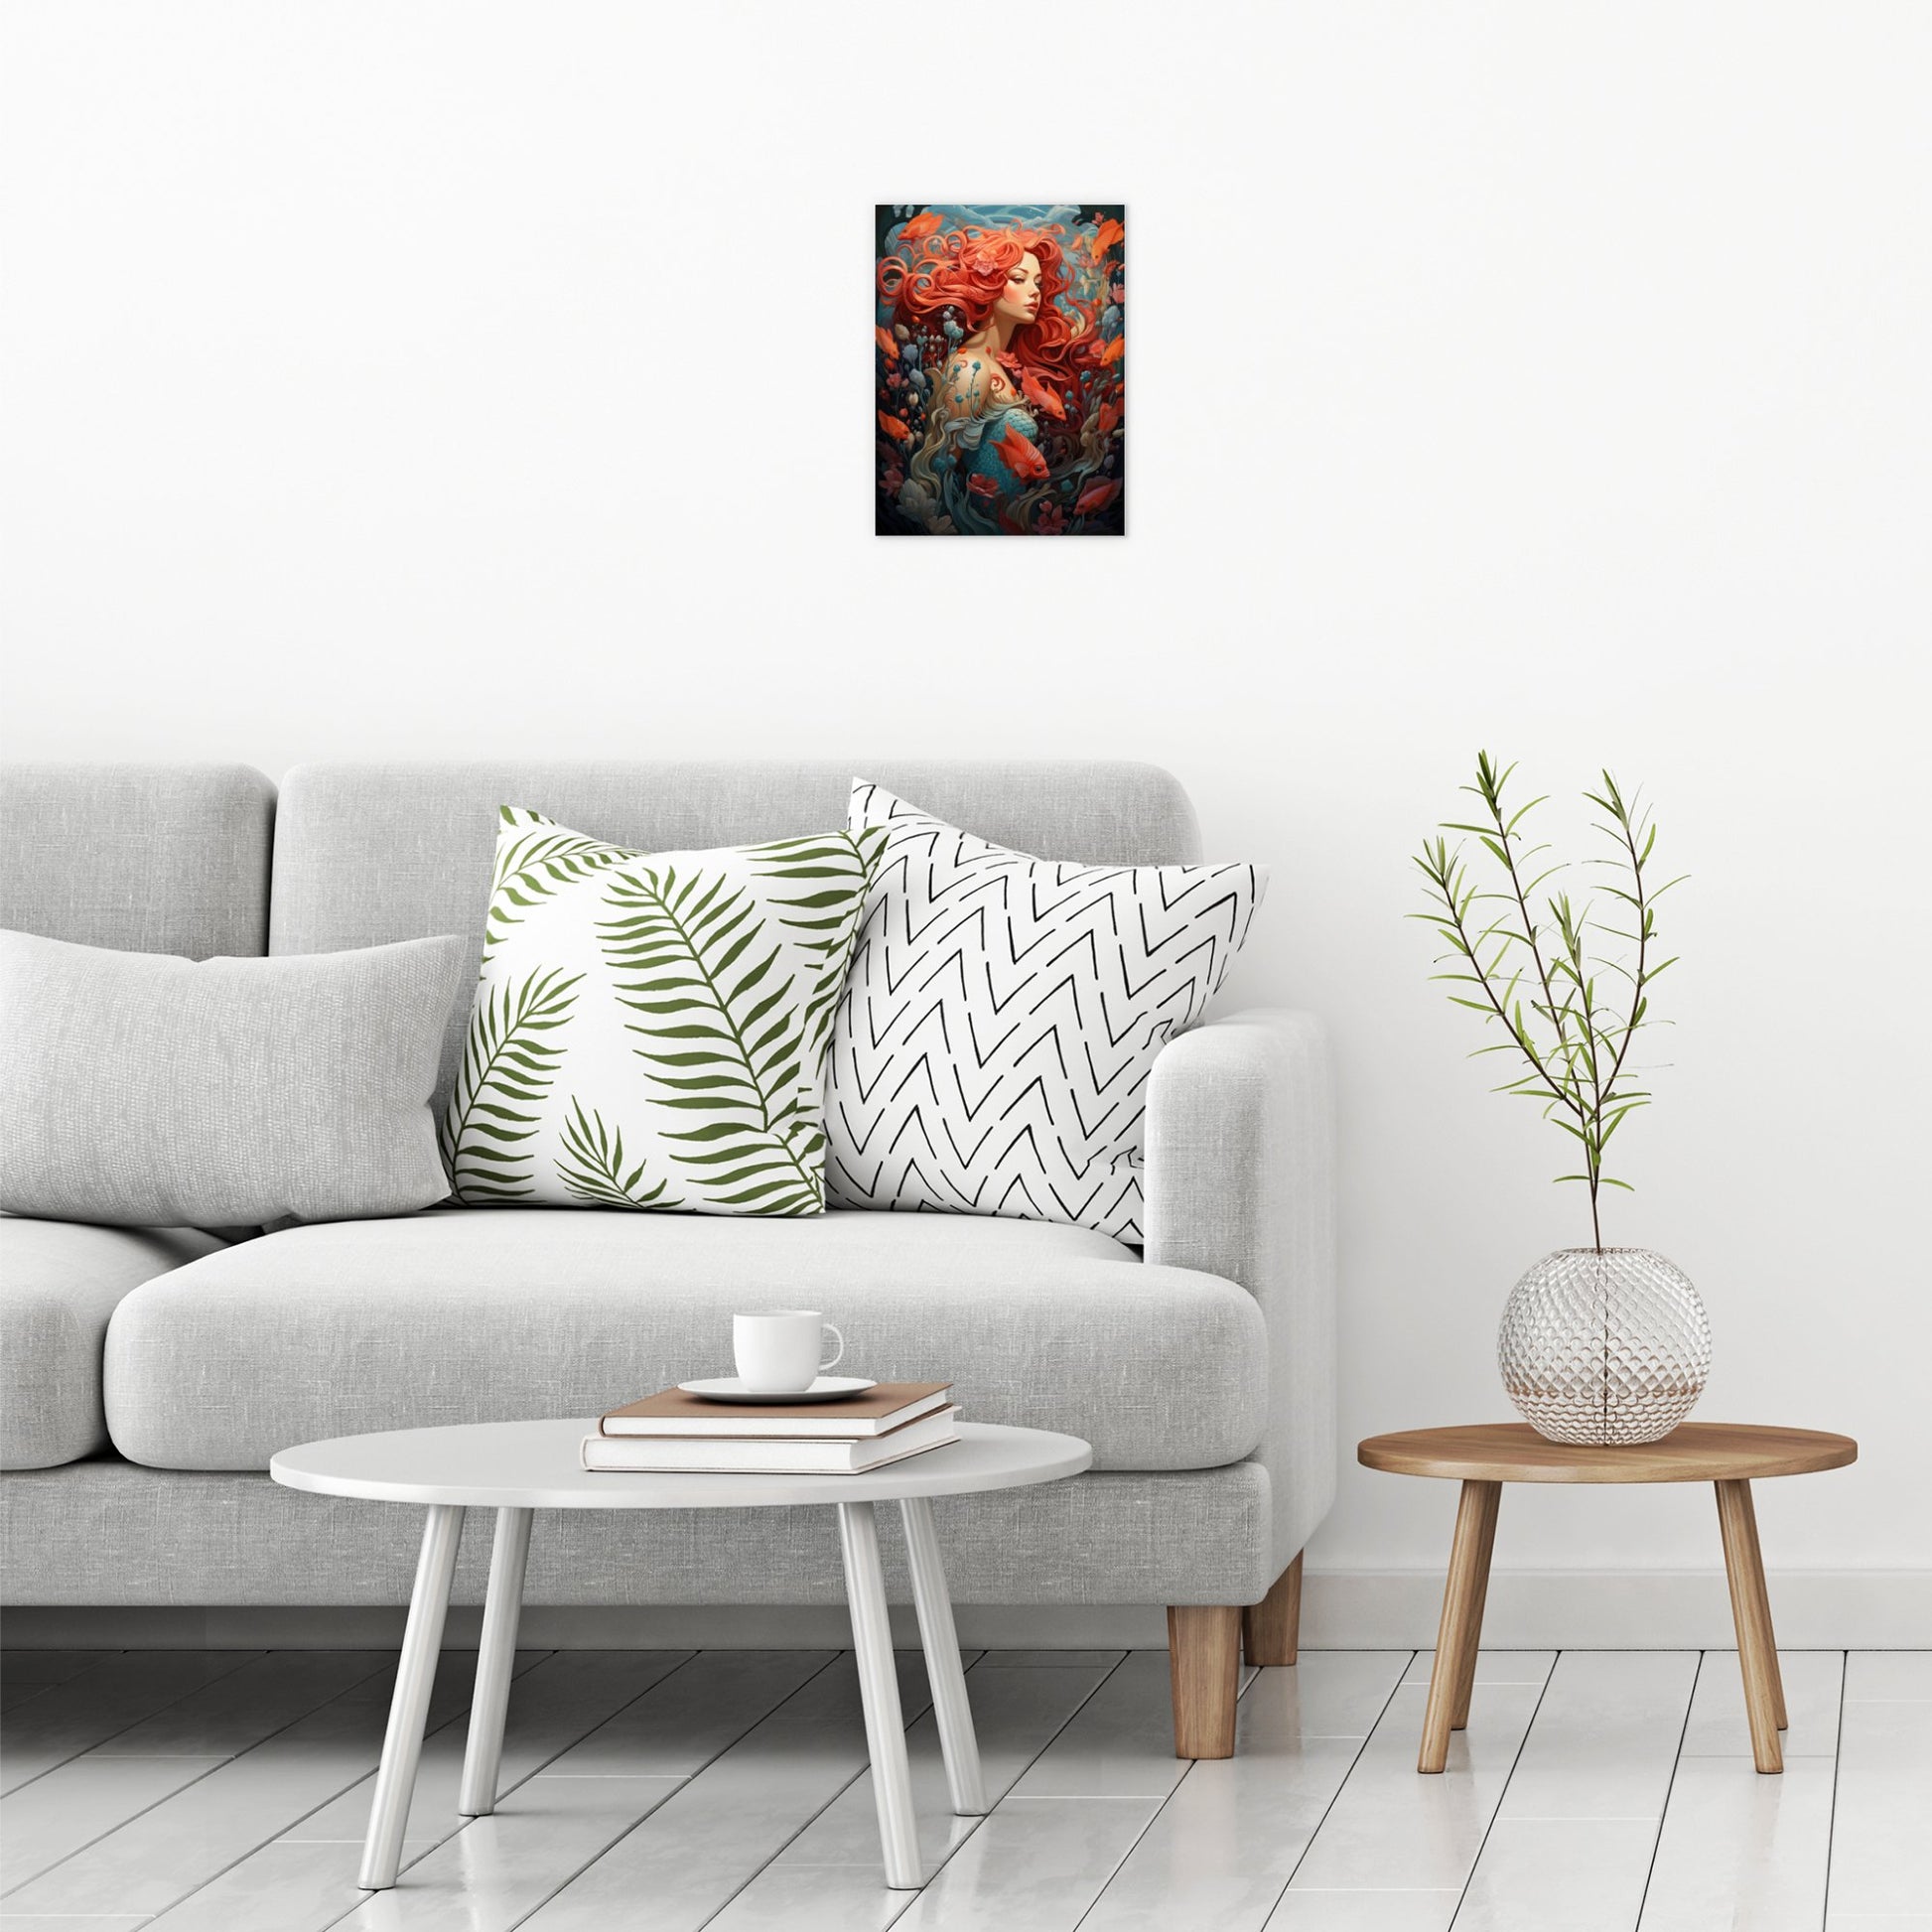 A contemporary modern room view showing a small size metal art poster display plate with printed design of a Mermaid Fantasy Painting